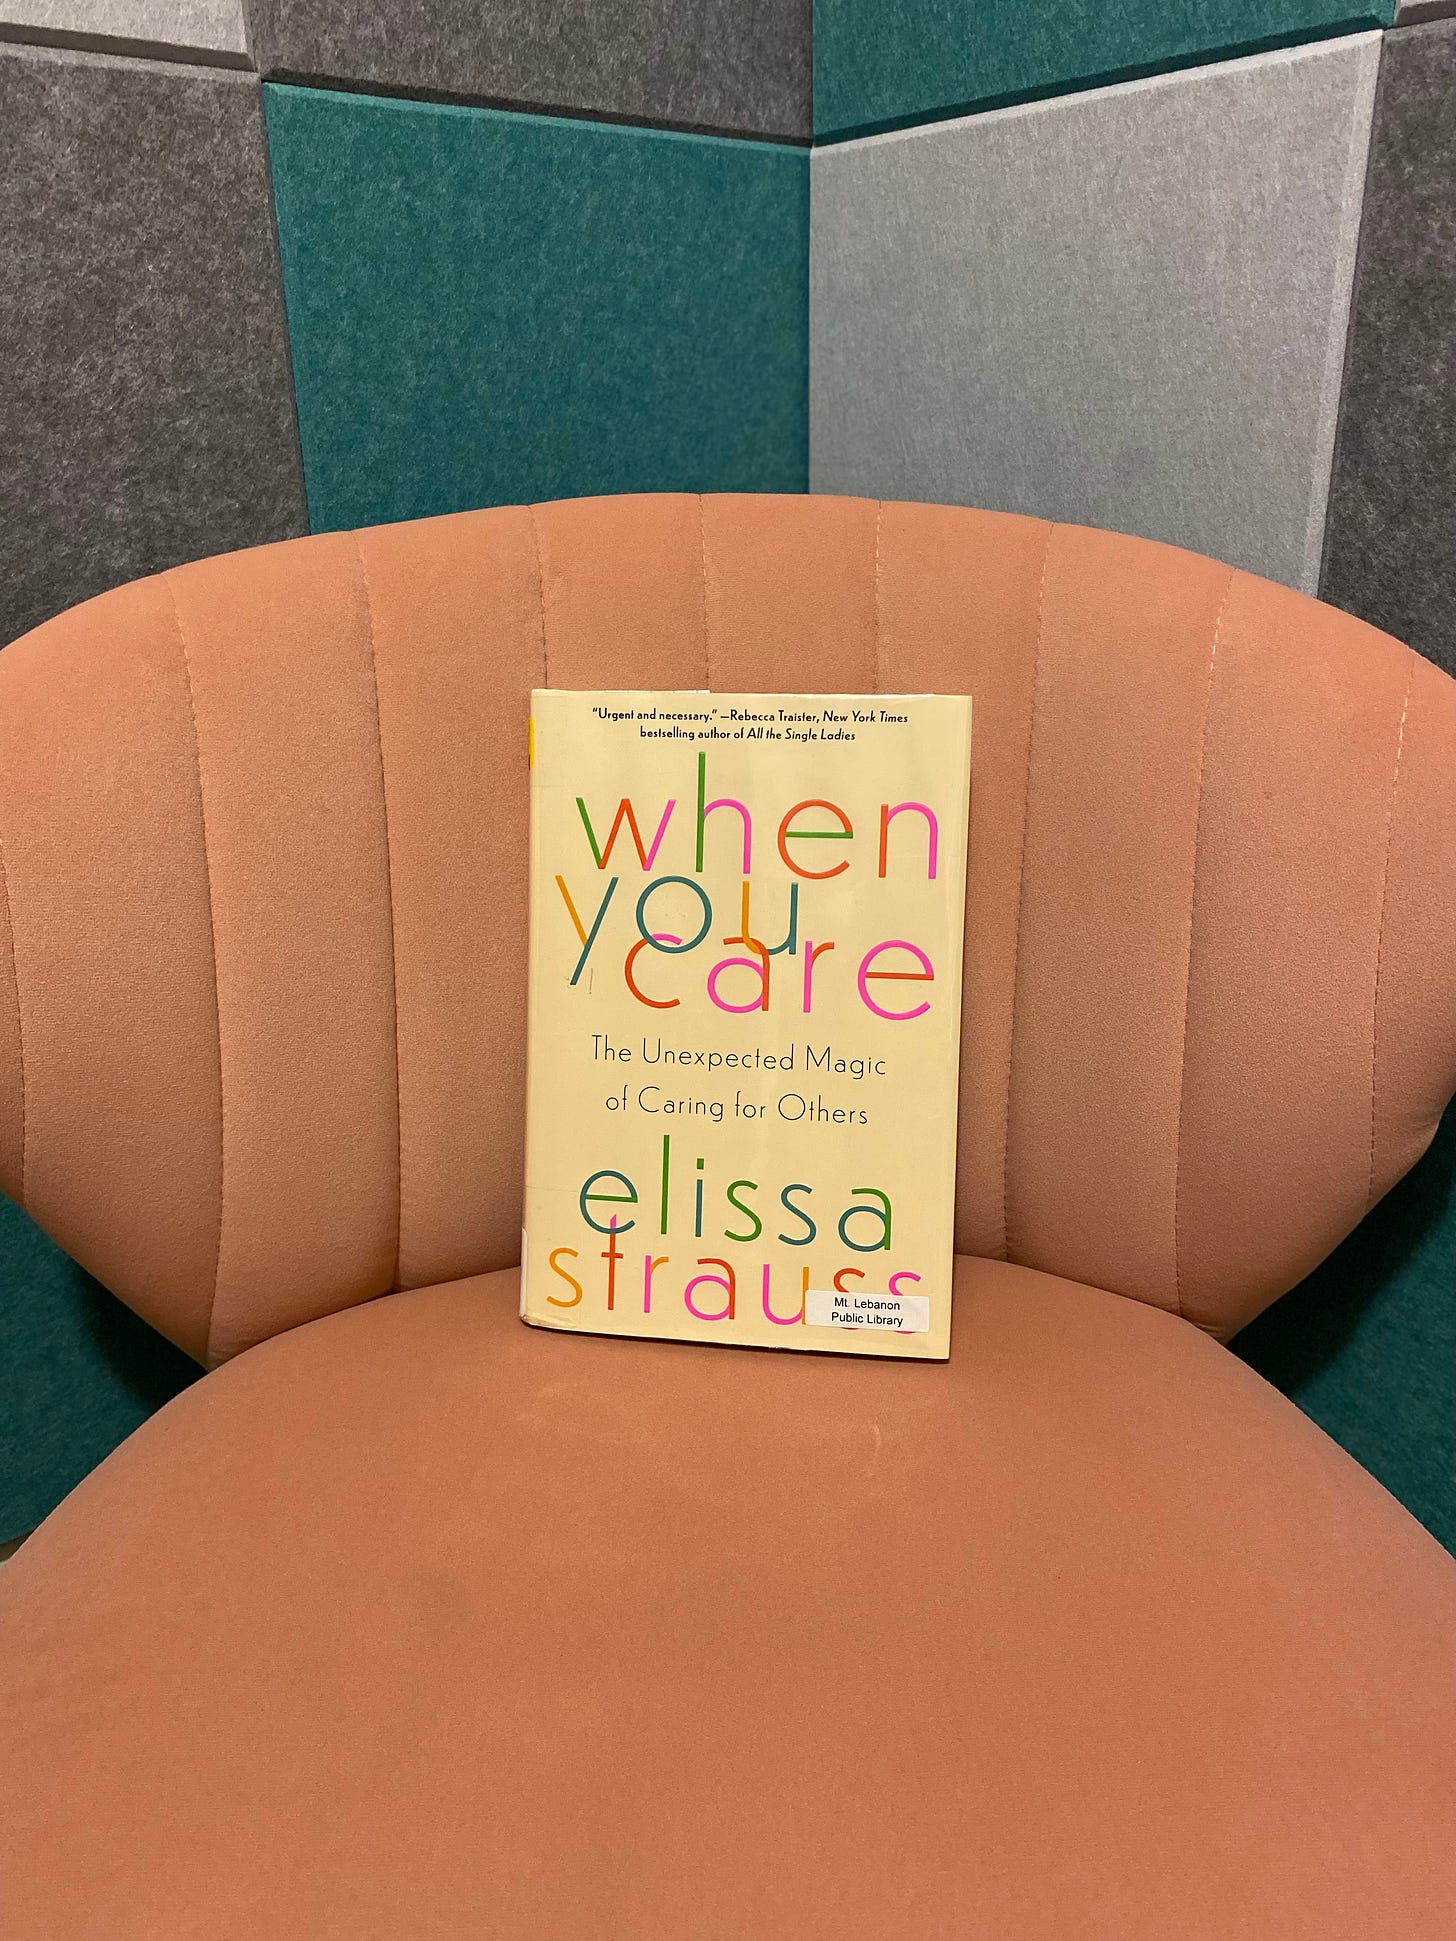 Book titled When You Care by Elissa Strauss in pink chair